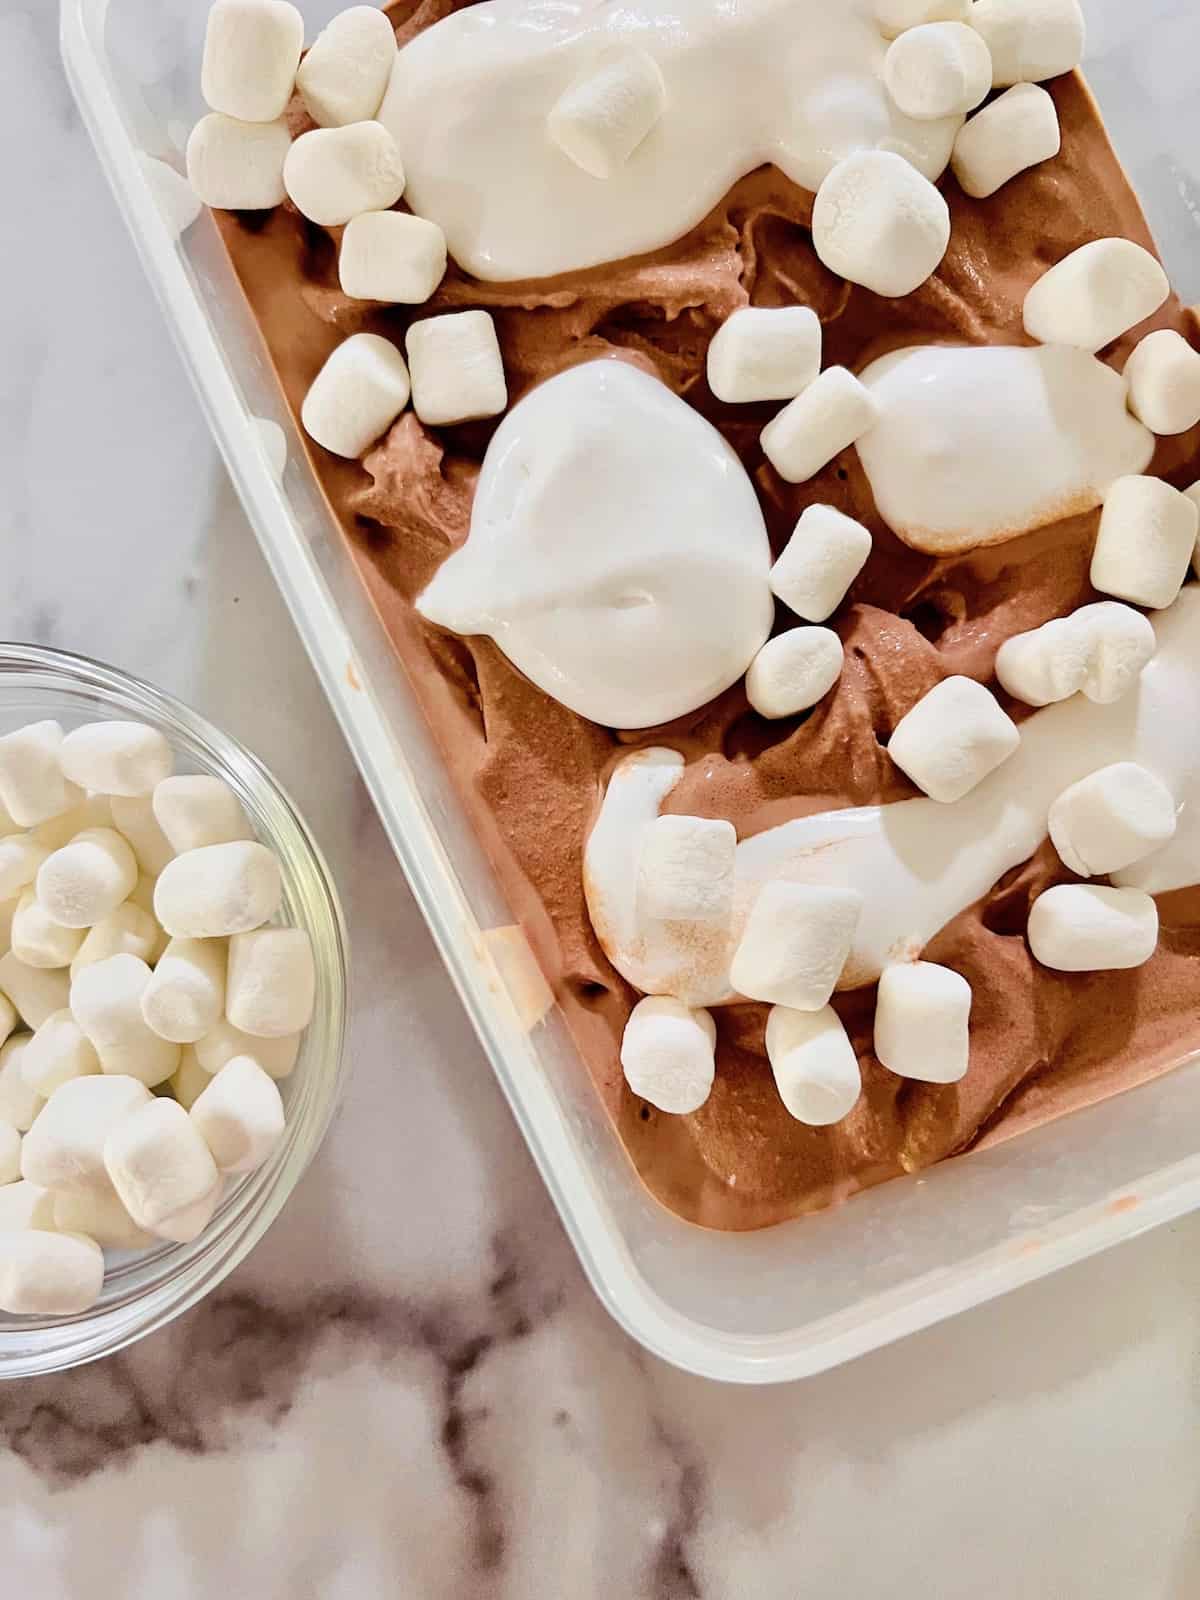 Marshmallows on top of the chocolate ice cream ready to mix in.